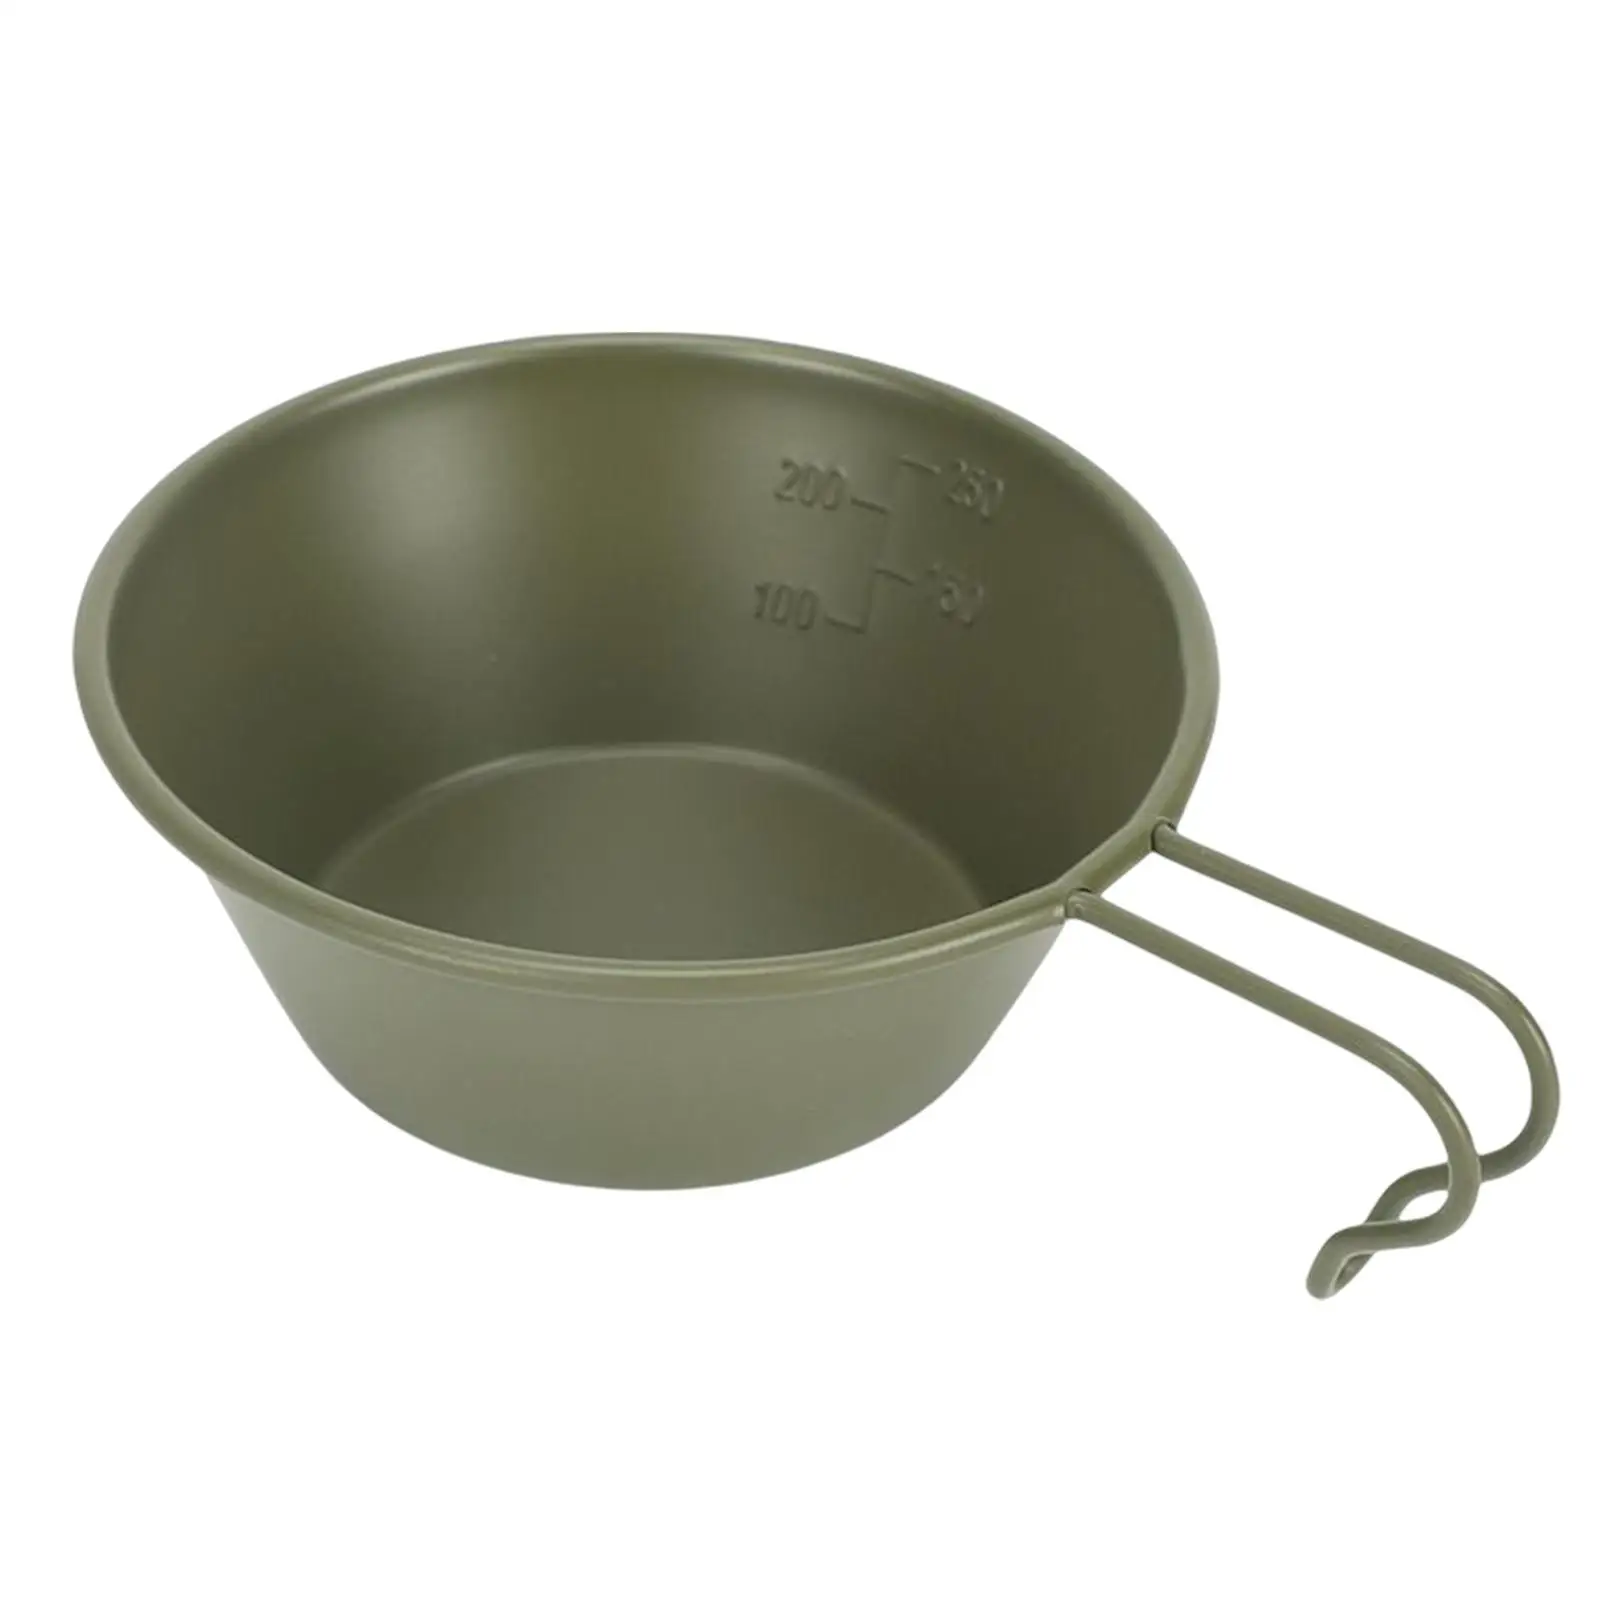 Stainless Steel Camping Bowl Outdoor Cookware Cooking for BBQ Picnic